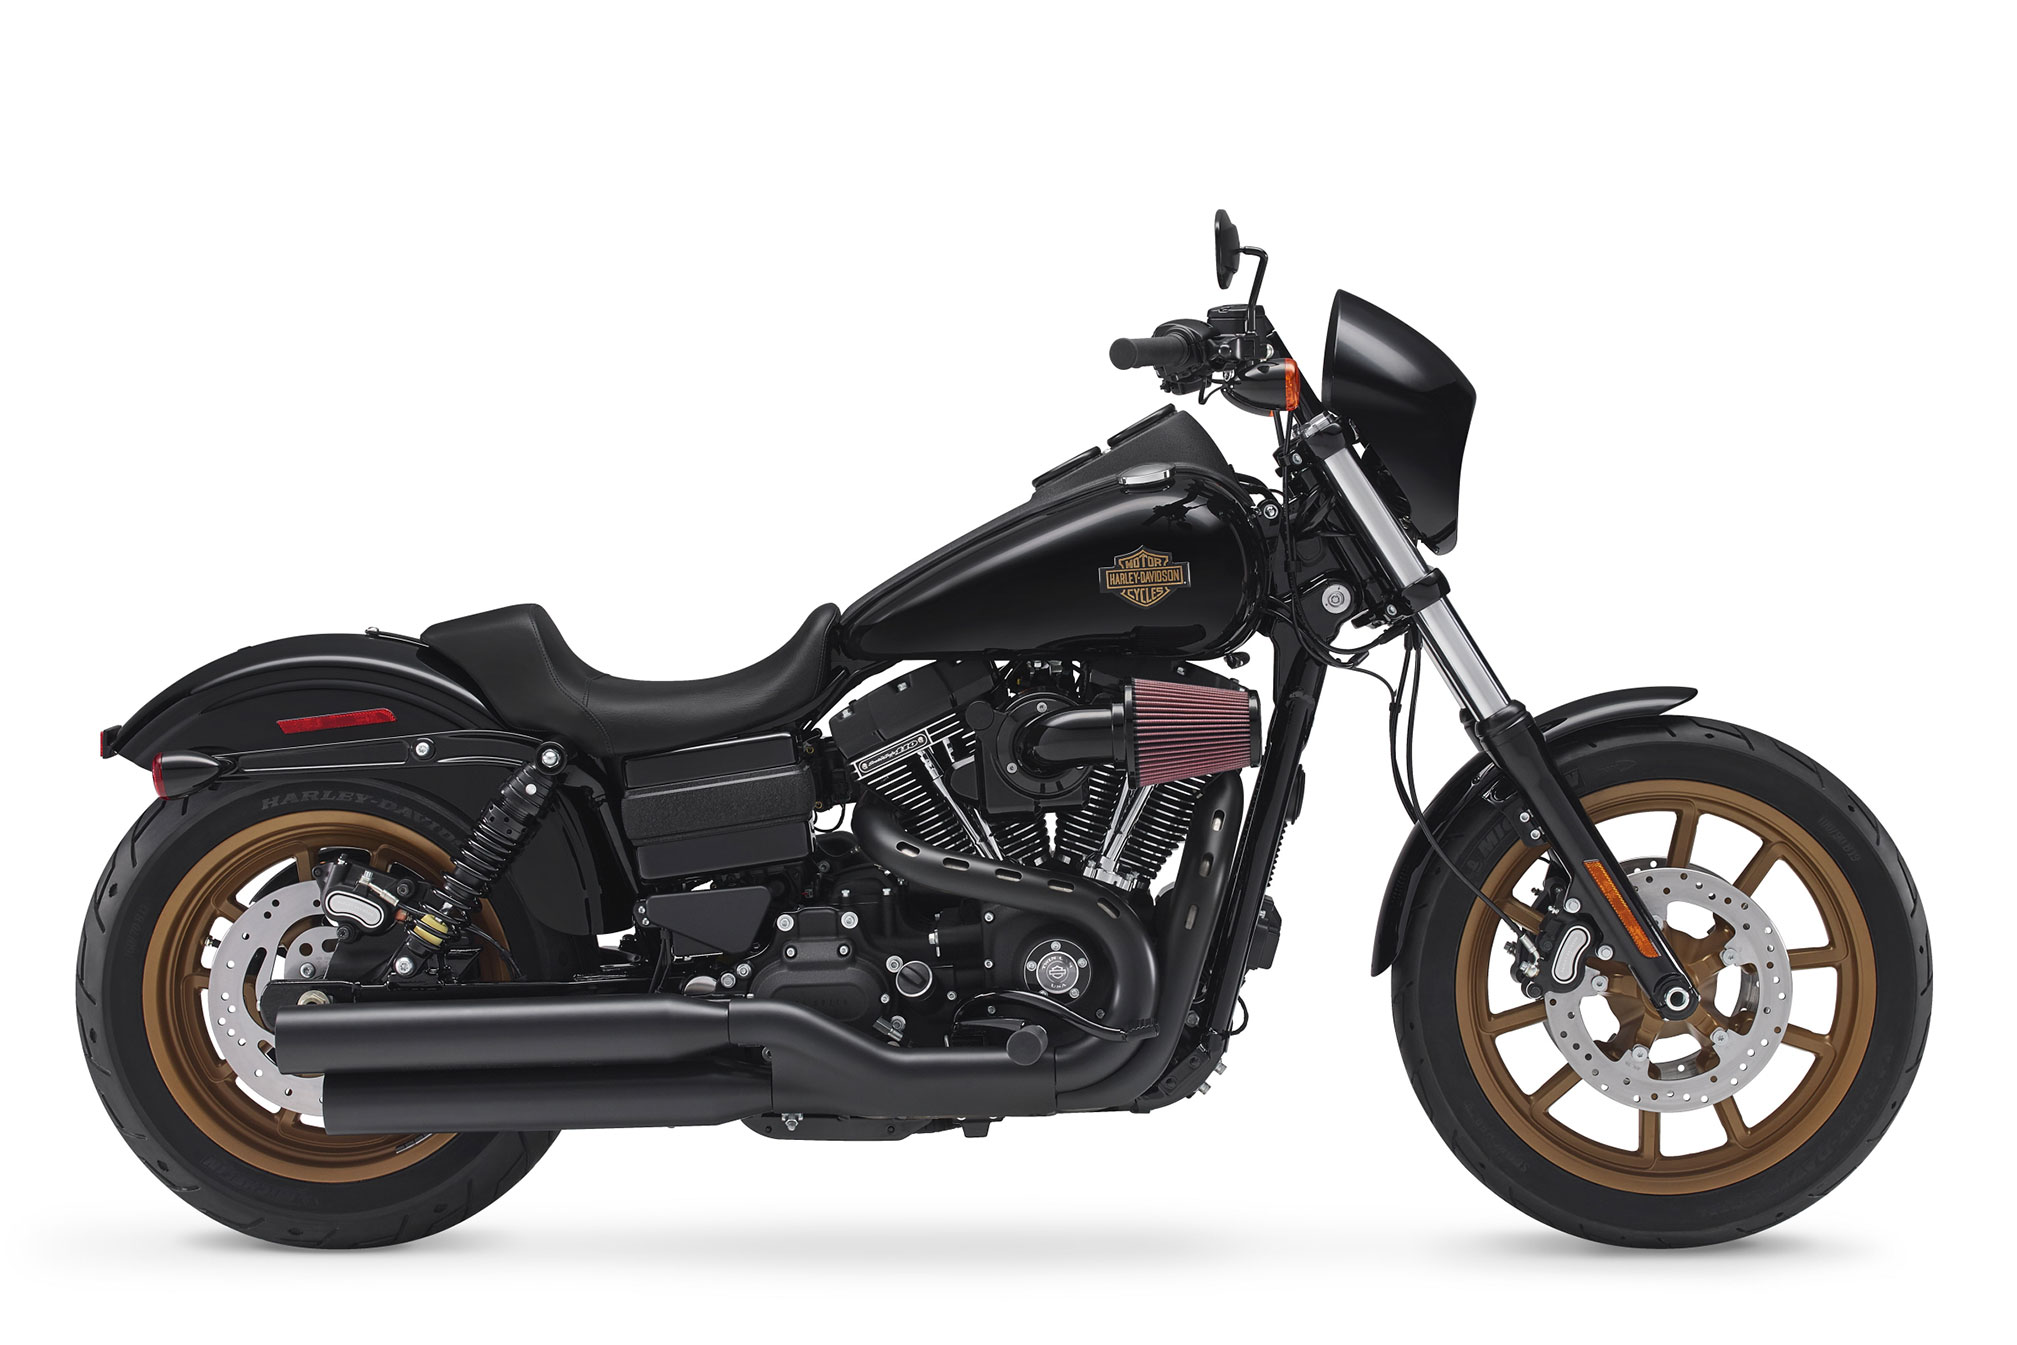 2017 Harley Davidson Low Rider S Review